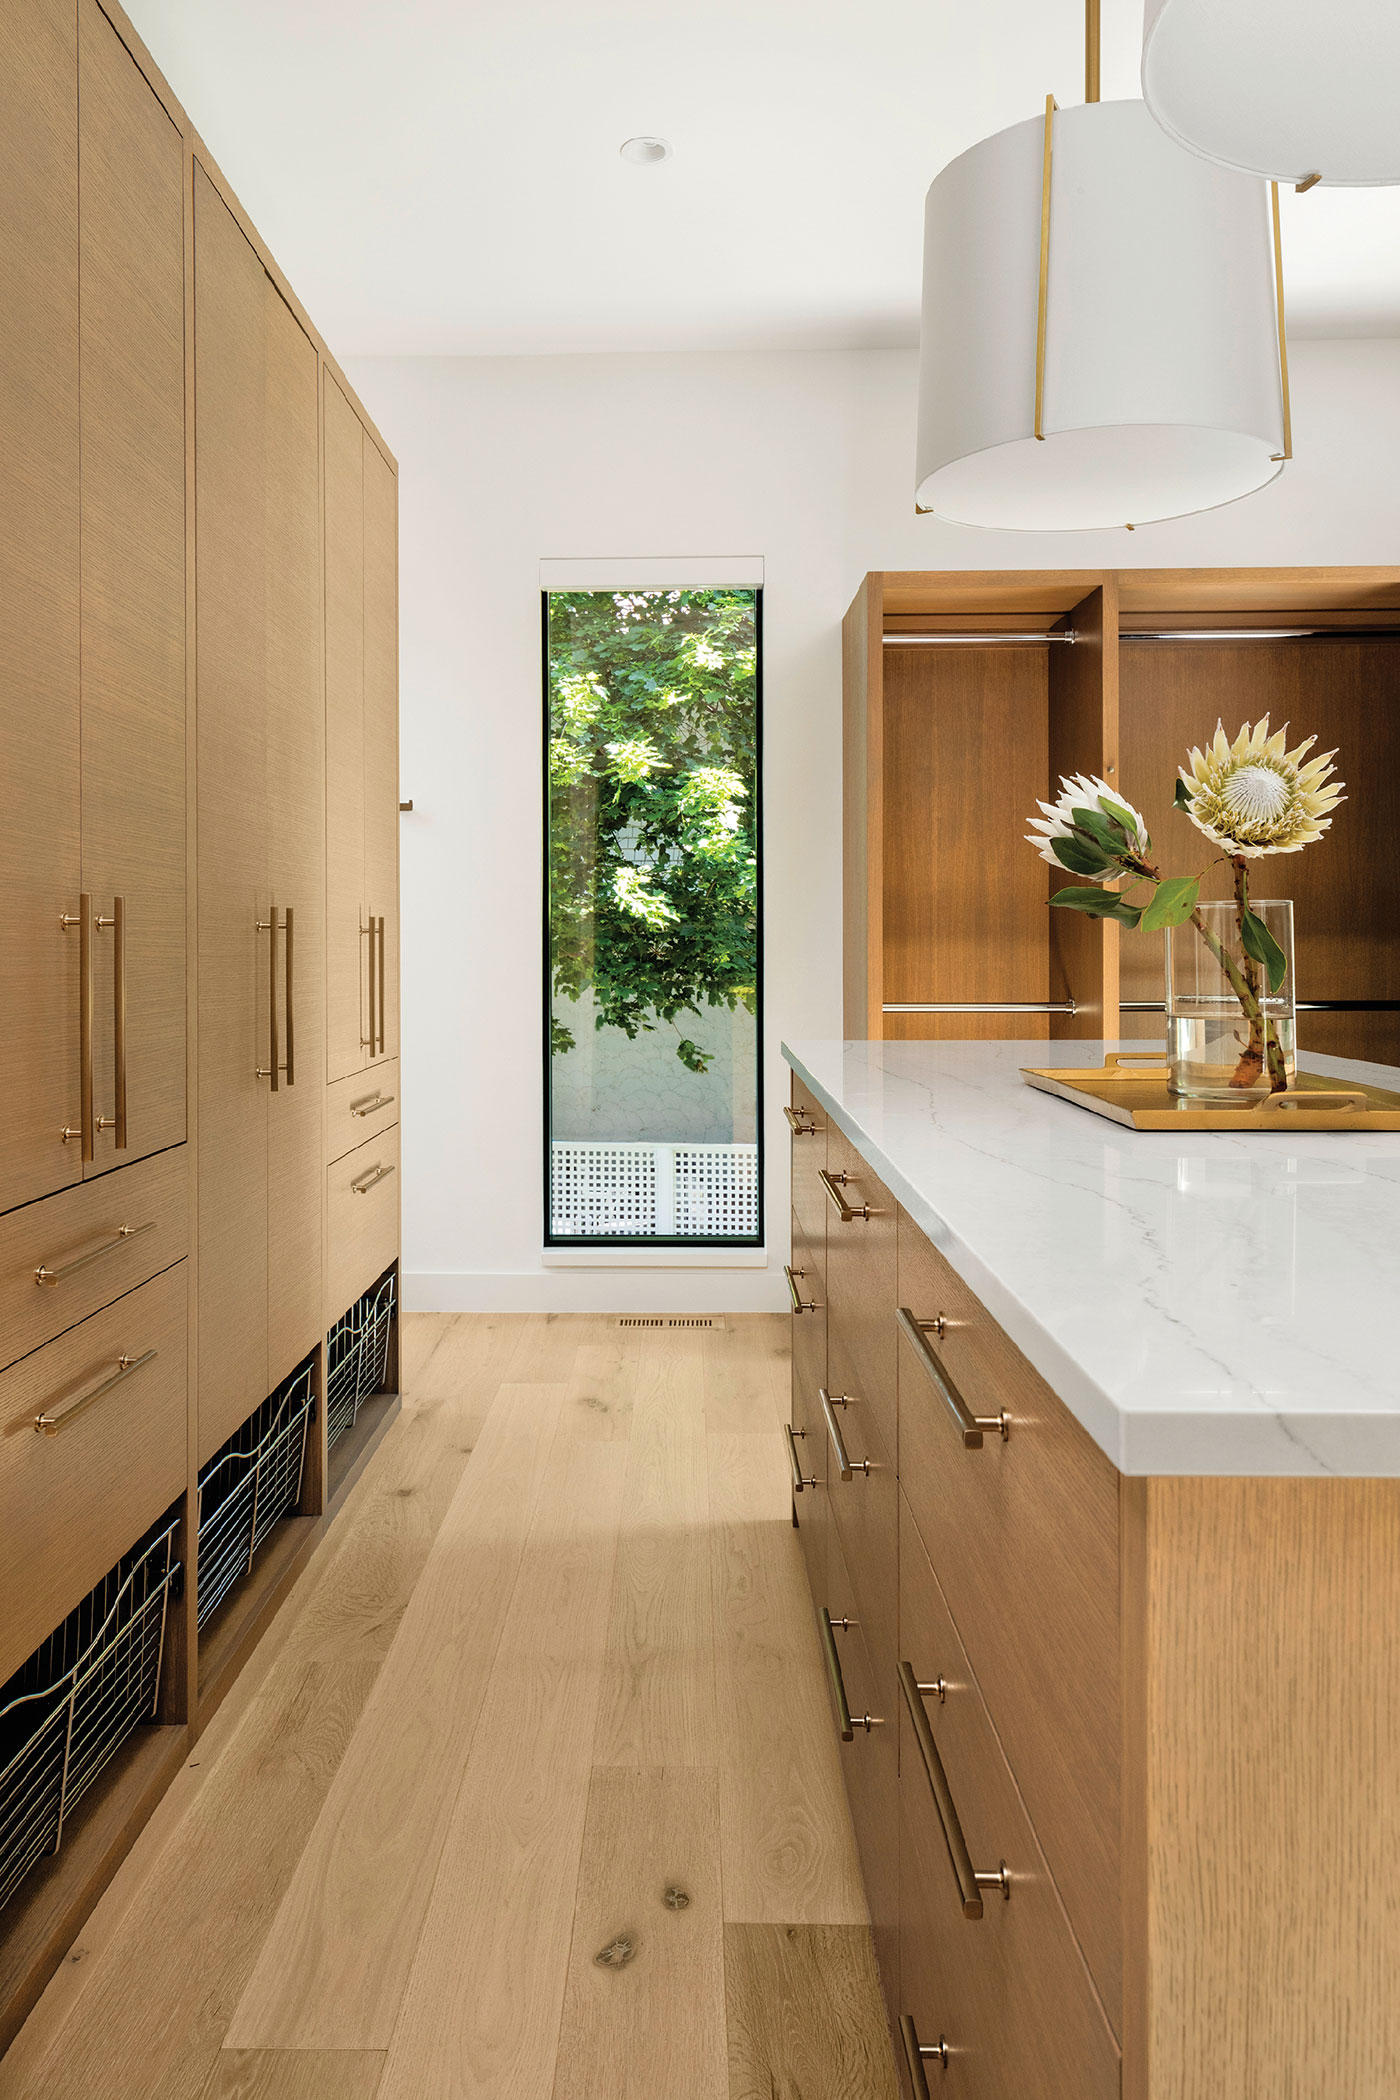 A modern kitchen with long island